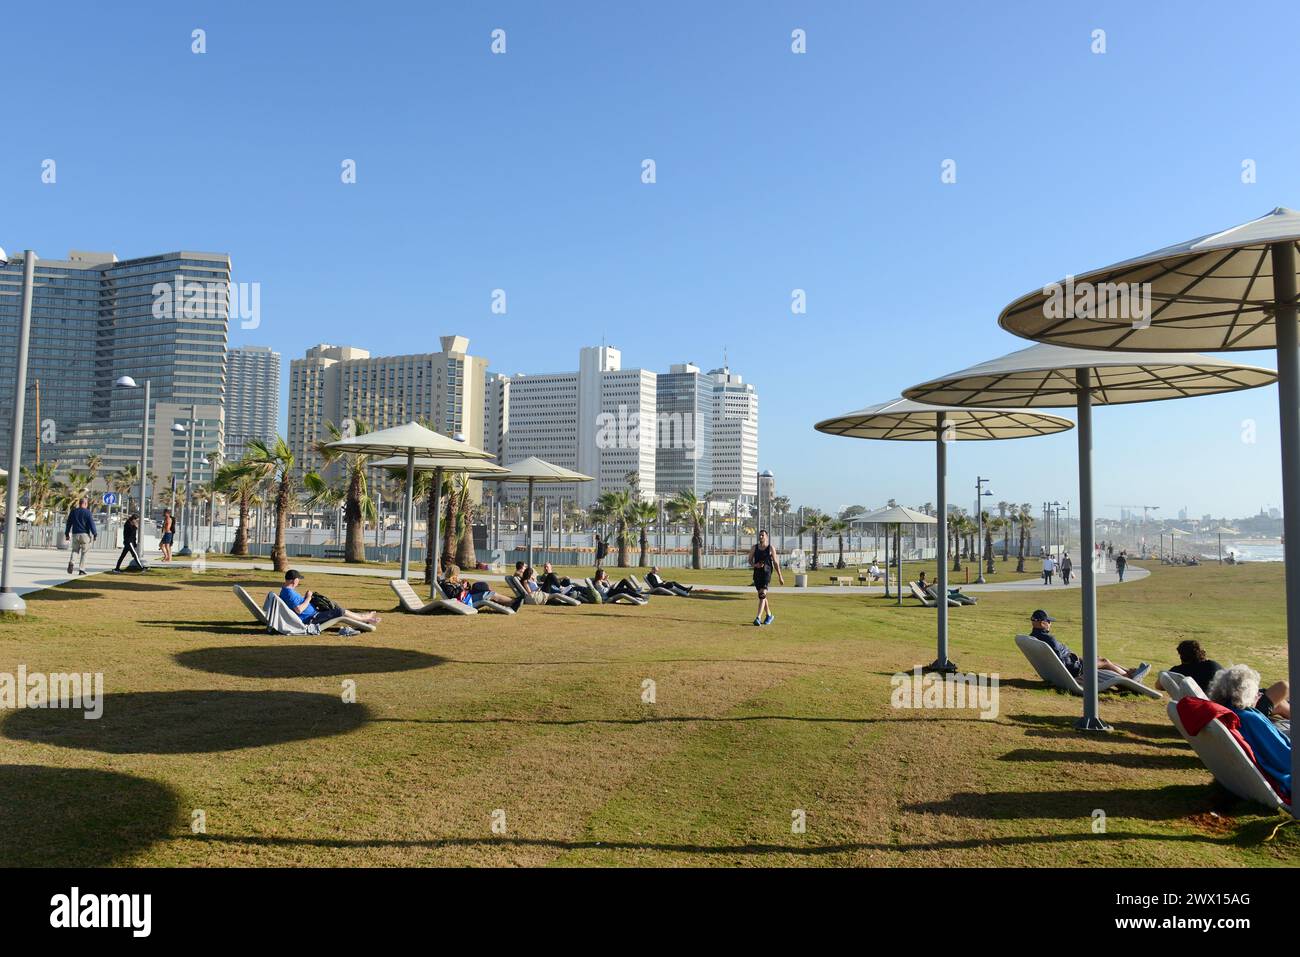 A beautiful park by the beach sports community center in Tel-Aviv, Israel. Stock Photo